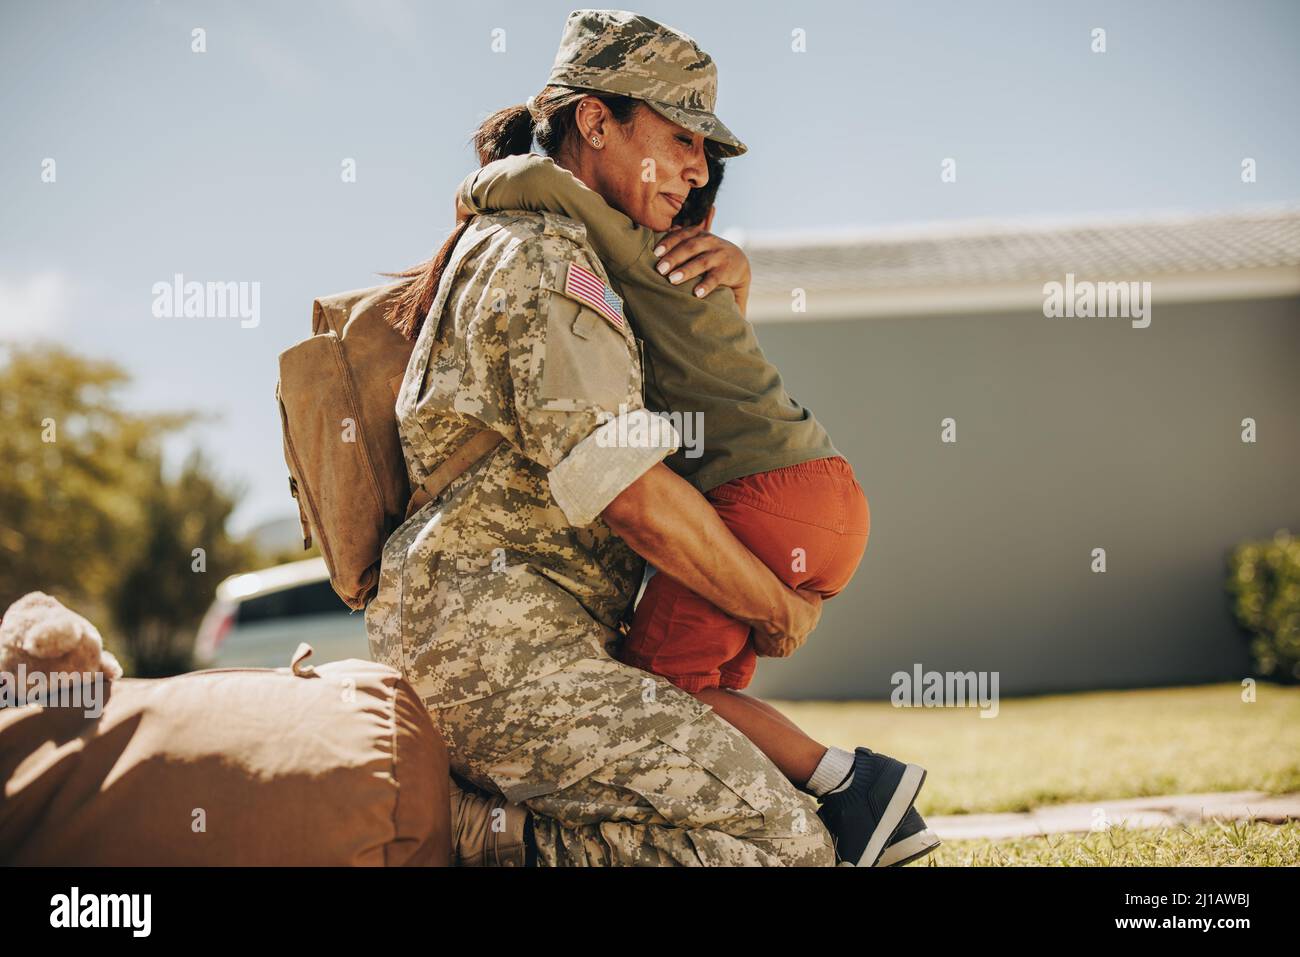 Emotional military mom embracing her son after returning home from the army. Courageous female soldier reuniting with her young child after military d Stock Photo